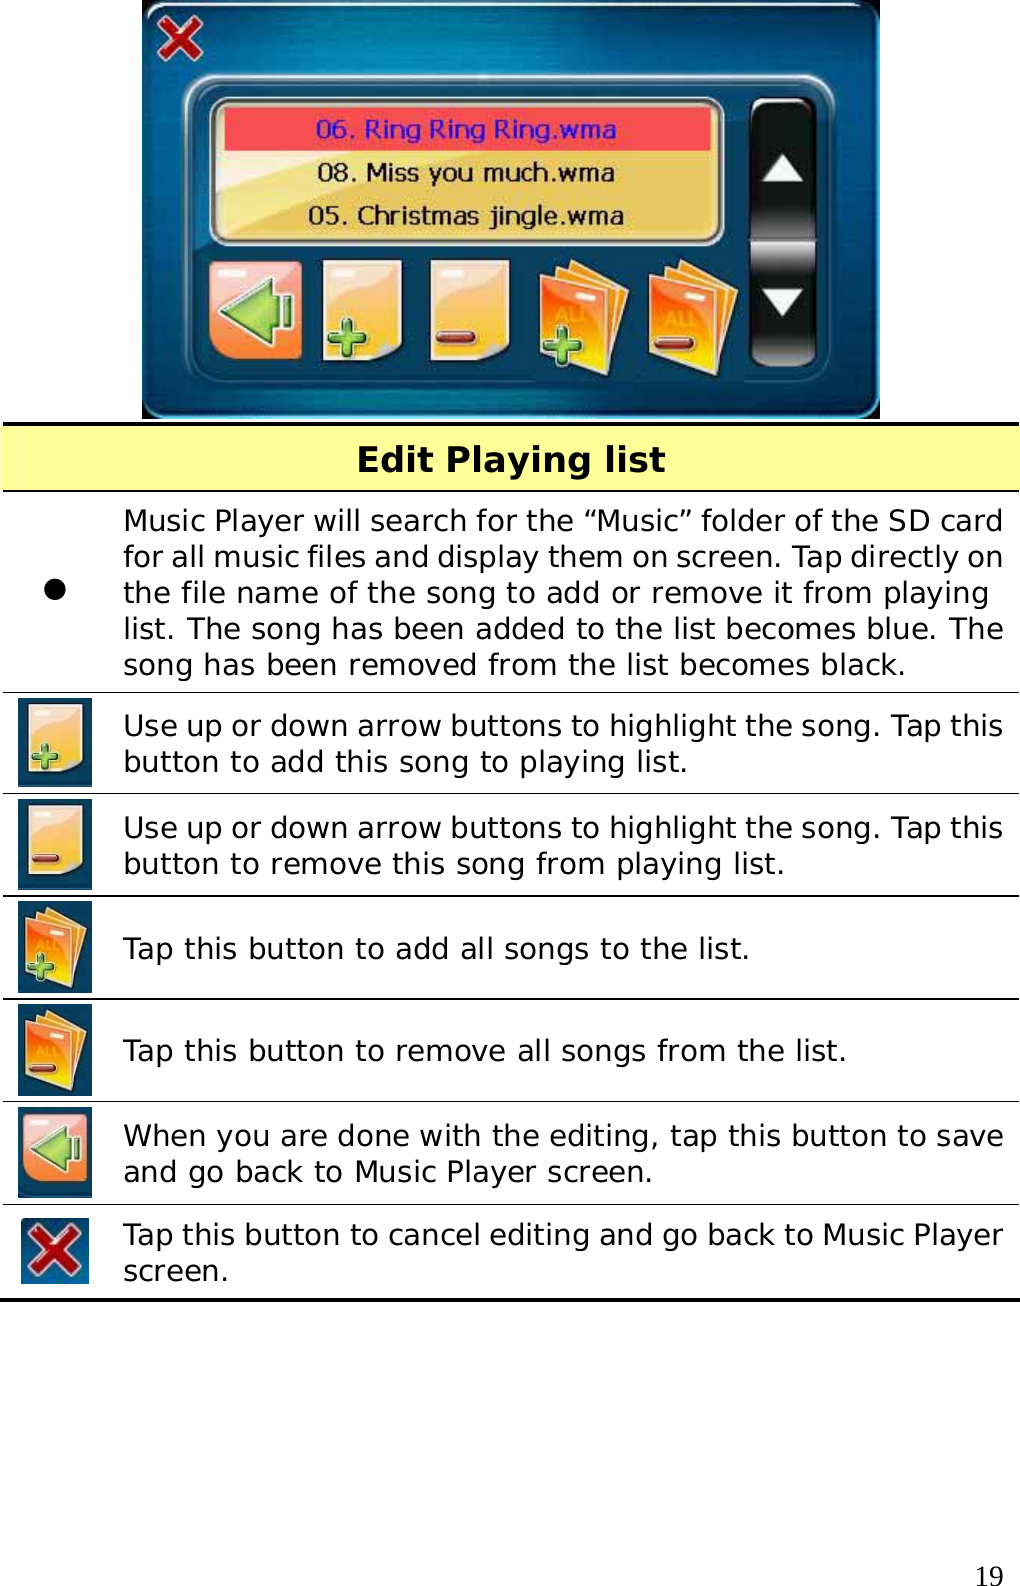  19 Edit Playing list z Music Player will search for the “Music” folder of the SD card for all music files and display them on screen. Tap directly on the file name of the song to add or remove it from playing list. The song has been added to the list becomes blue. The song has been removed from the list becomes black.   Use up or down arrow buttons to highlight the song. Tap this button to add this song to playing list.   Use up or down arrow buttons to highlight the song. Tap this button to remove this song from playing list.   Tap this button to add all songs to the list.  Tap this button to remove all songs from the list.  When you are done with the editing, tap this button to save and go back to Music Player screen.  Tap this button to cancel editing and go back to Music Player screen.     